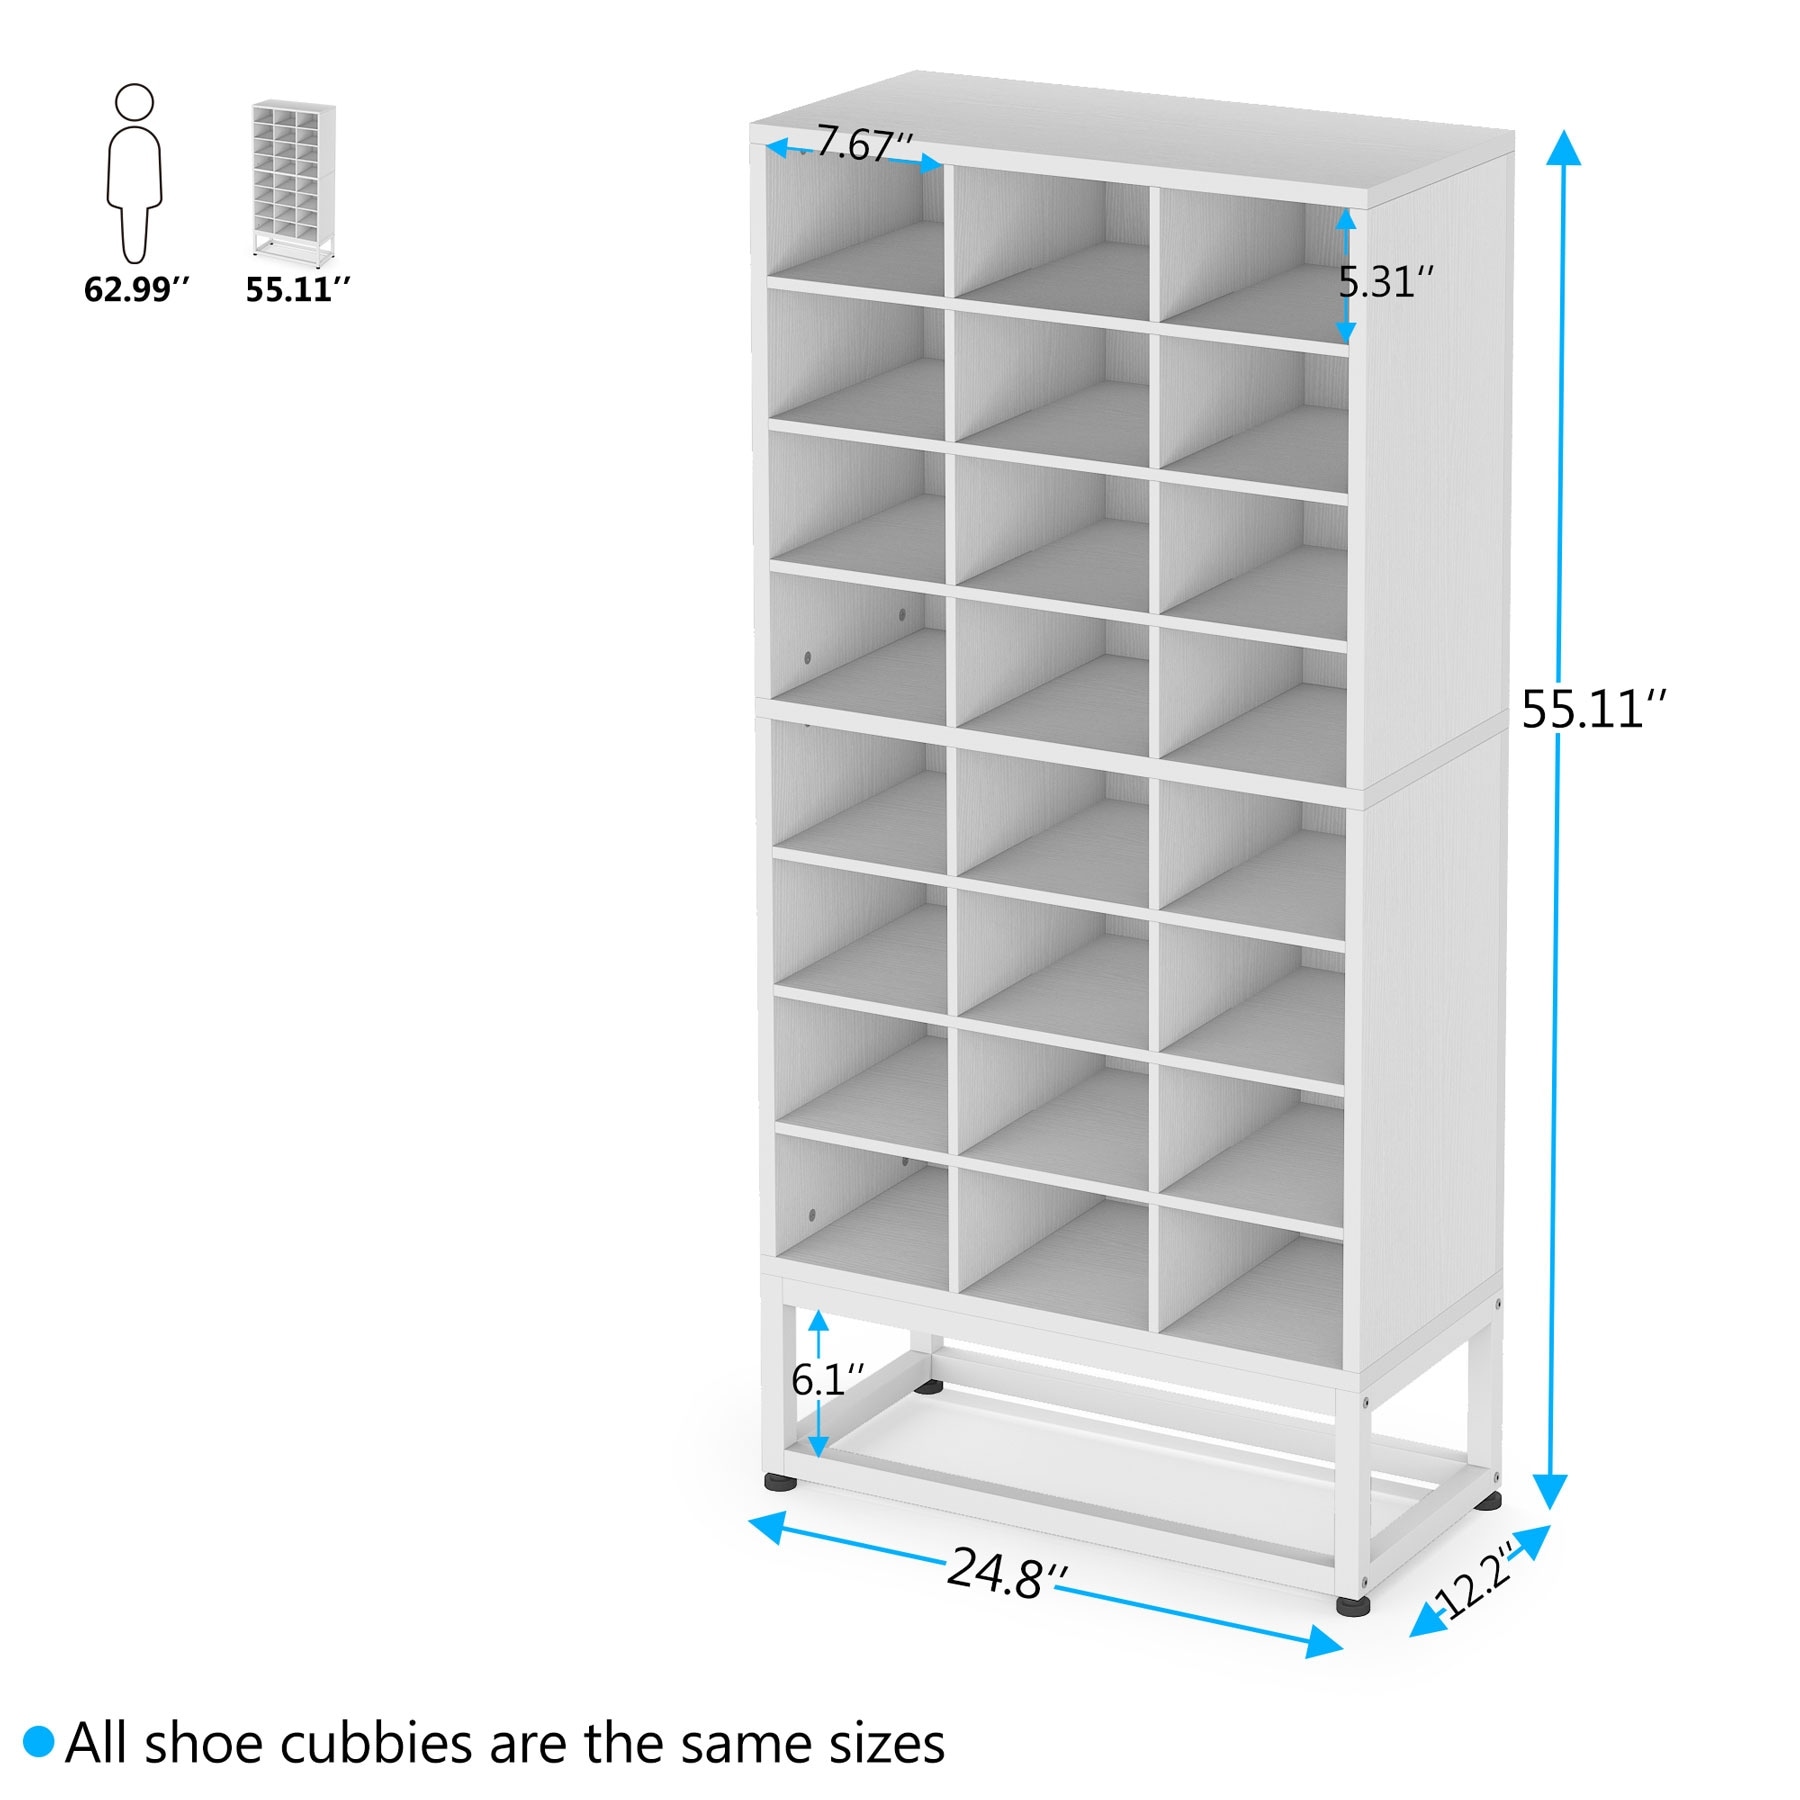 https://ak1.ostkcdn.com/images/products/is/images/direct/44195332c984b533b1a54d1be2b62c29a7c2abe6/24-Pair-Shoe-Storage-Cabinet-Adjustable-Shoe-Rack-Organizers%2C-8-Tier-White-Cube-Storage-Bookcase.jpg